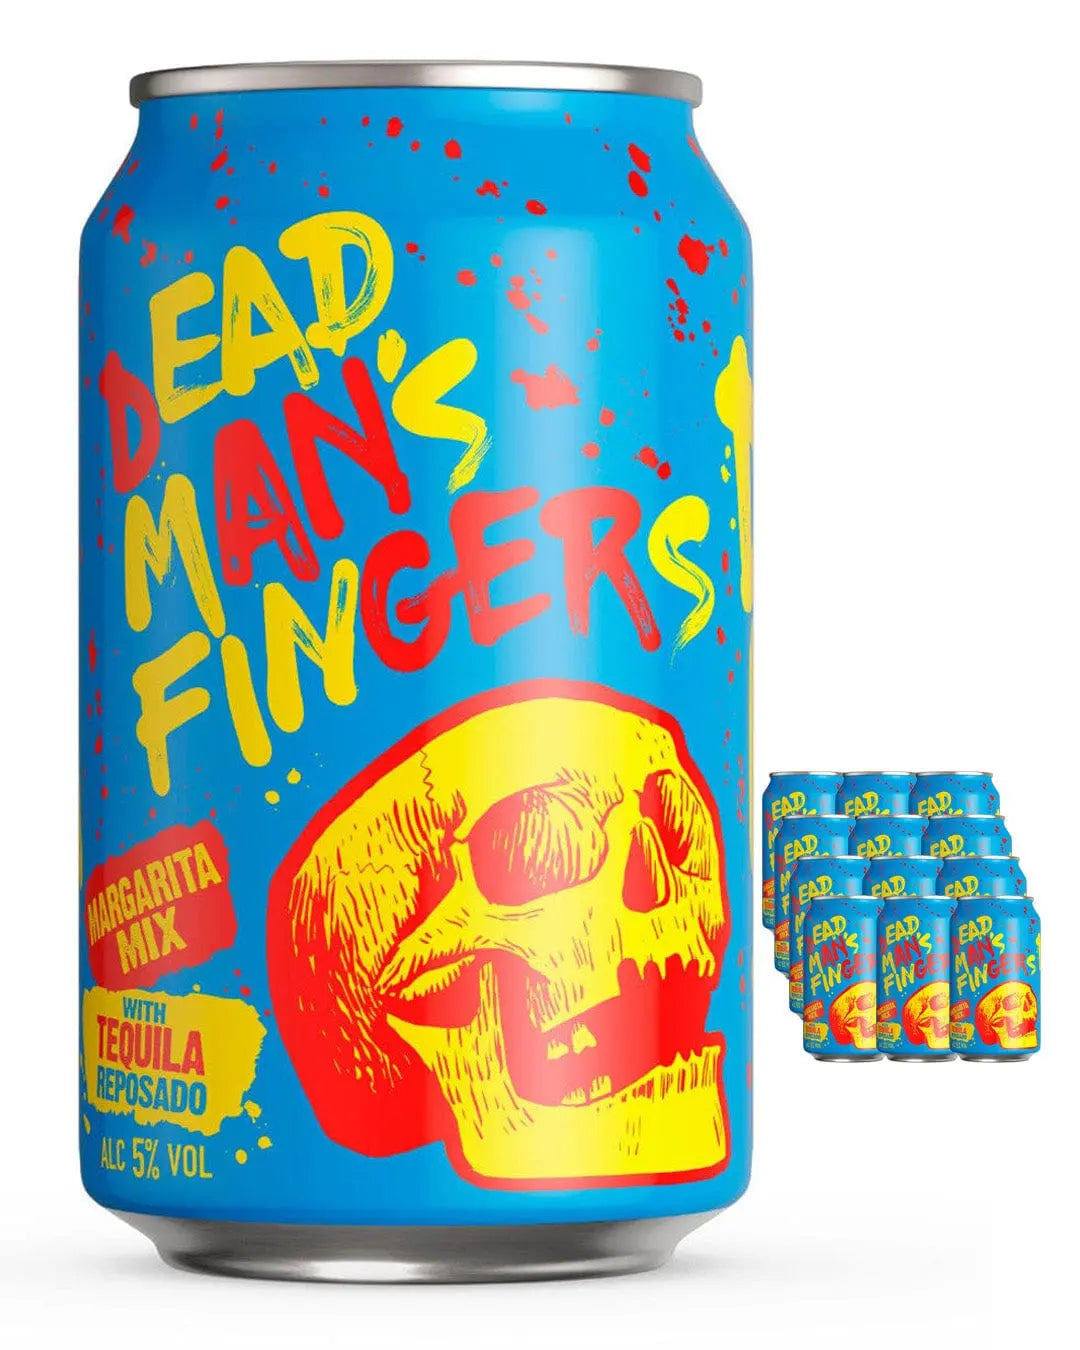 Dead Man's Fingers Tequila Reposado Margarita Mix Cans, 12 x 330 ml Ready Made Cocktails